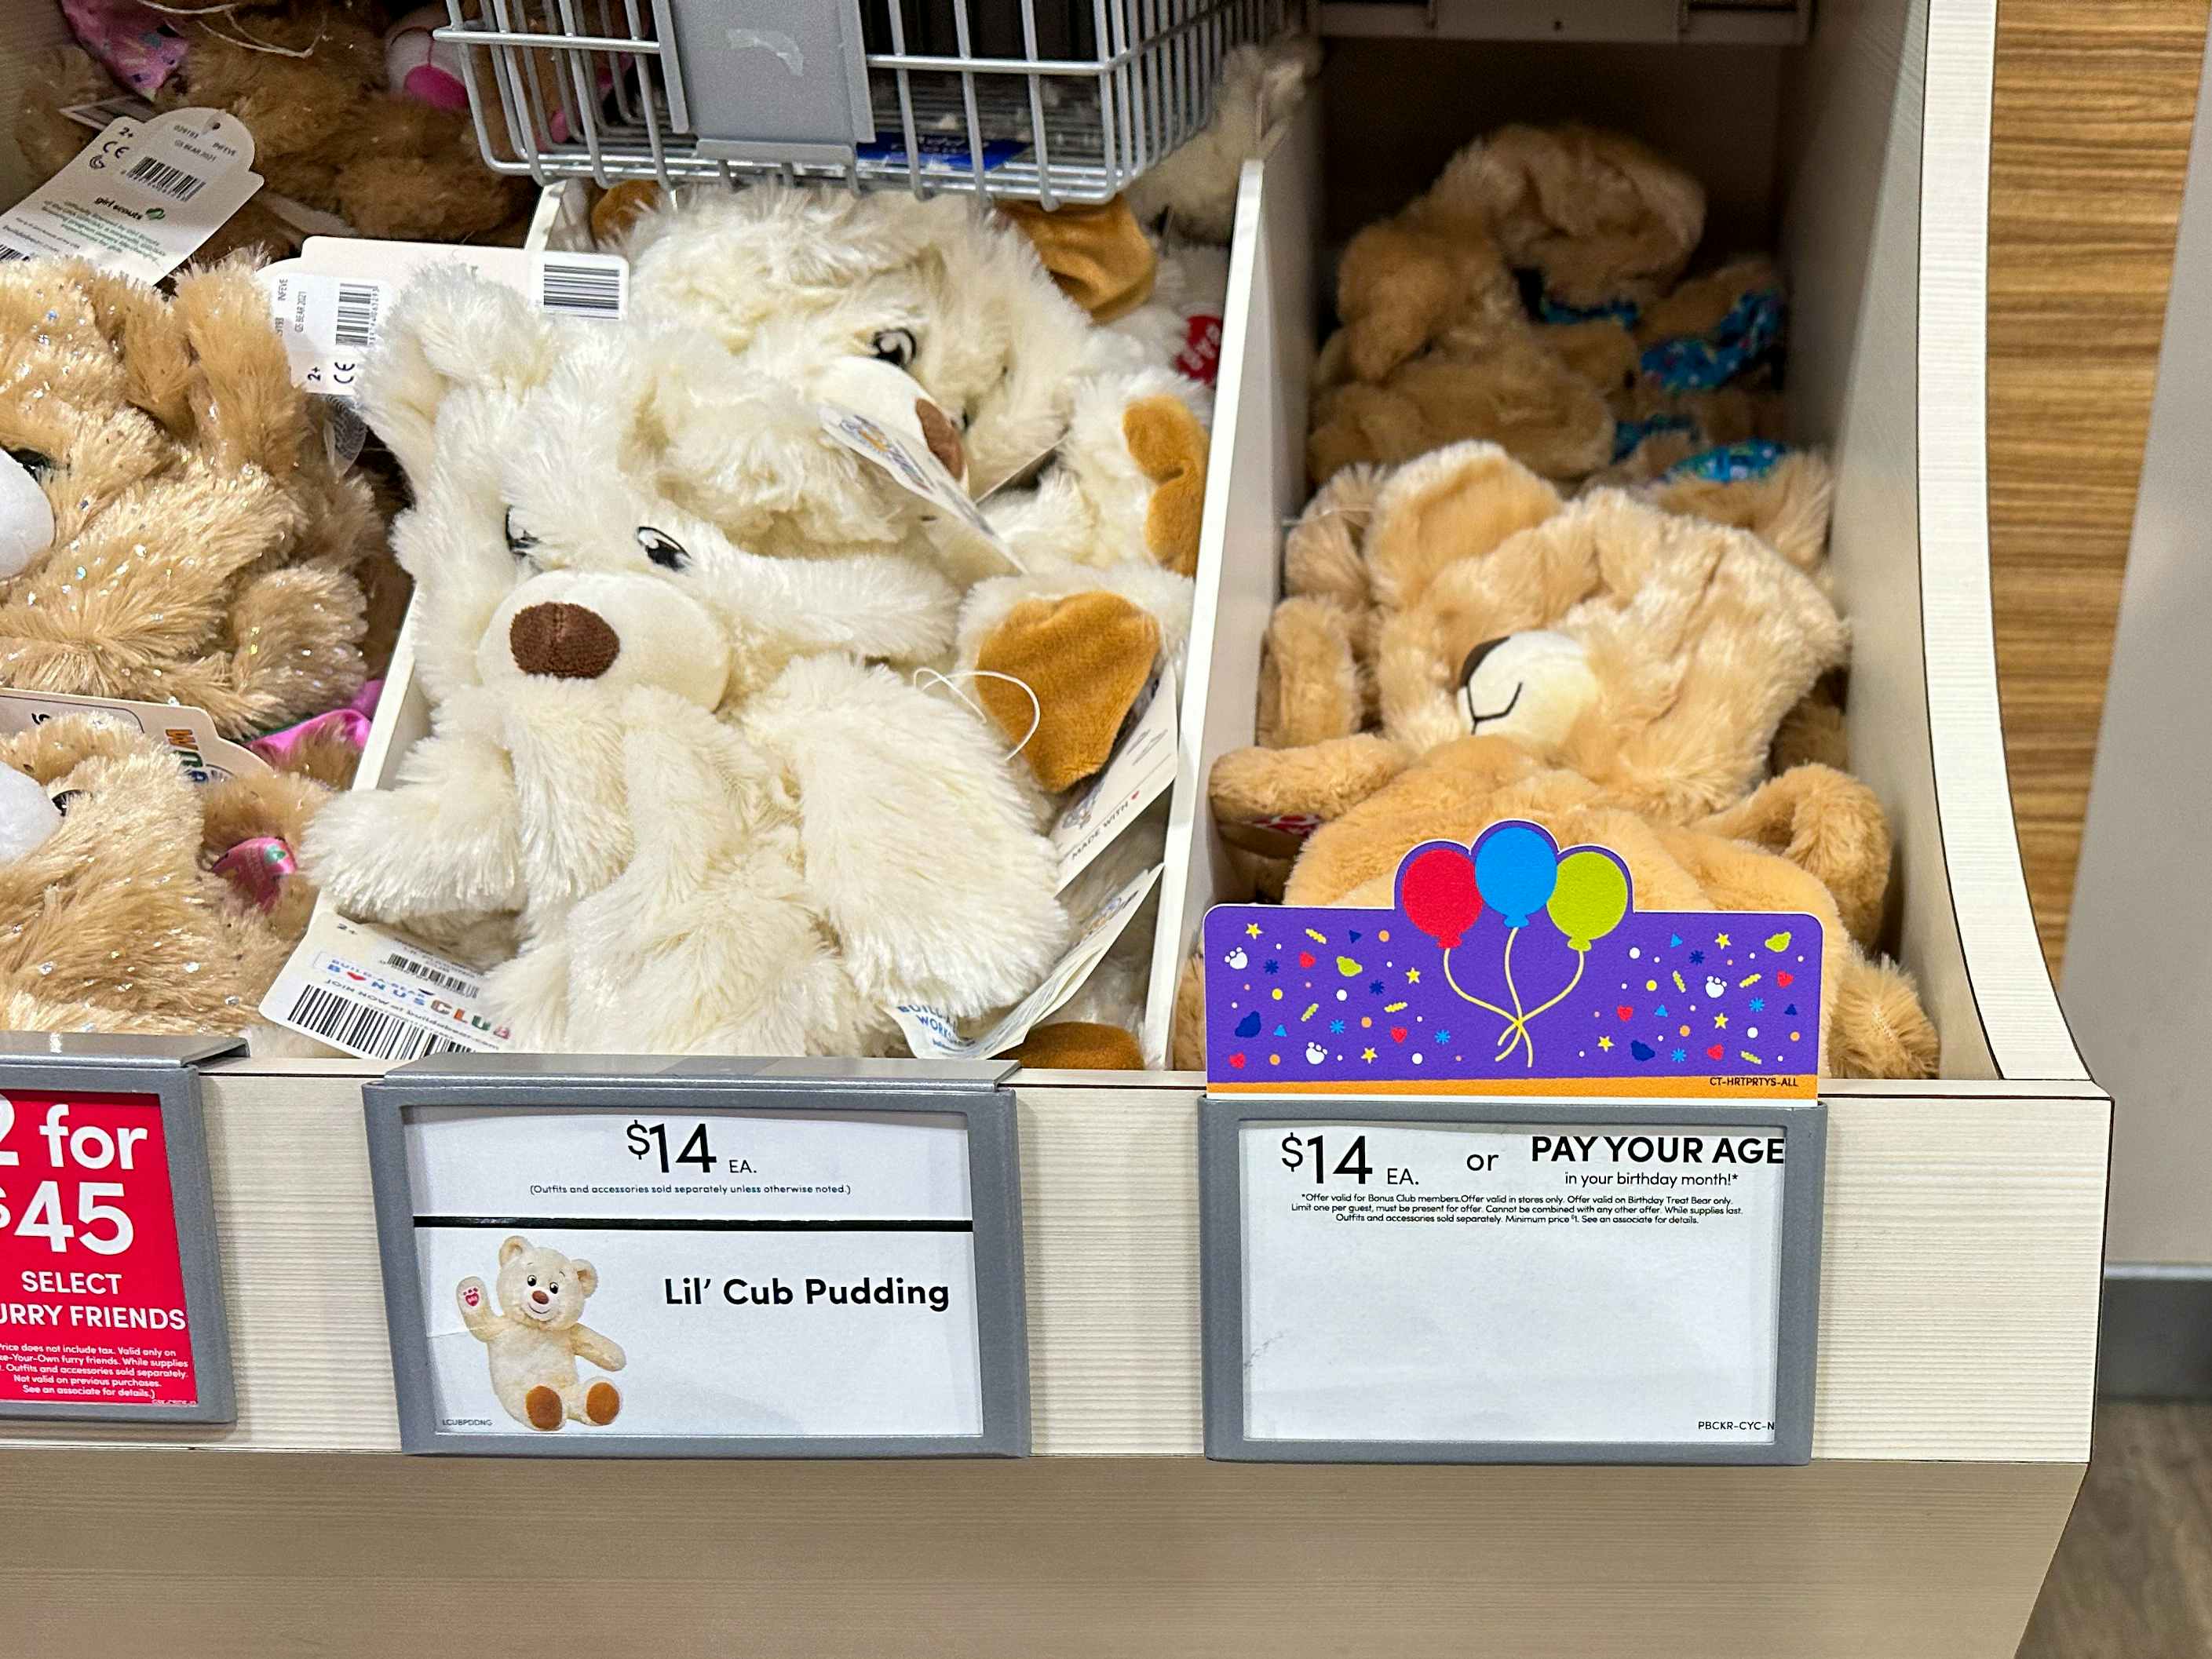 A shelf of Build-A-Bear's Birthday Bears with the price of $14 or Pay Your Age